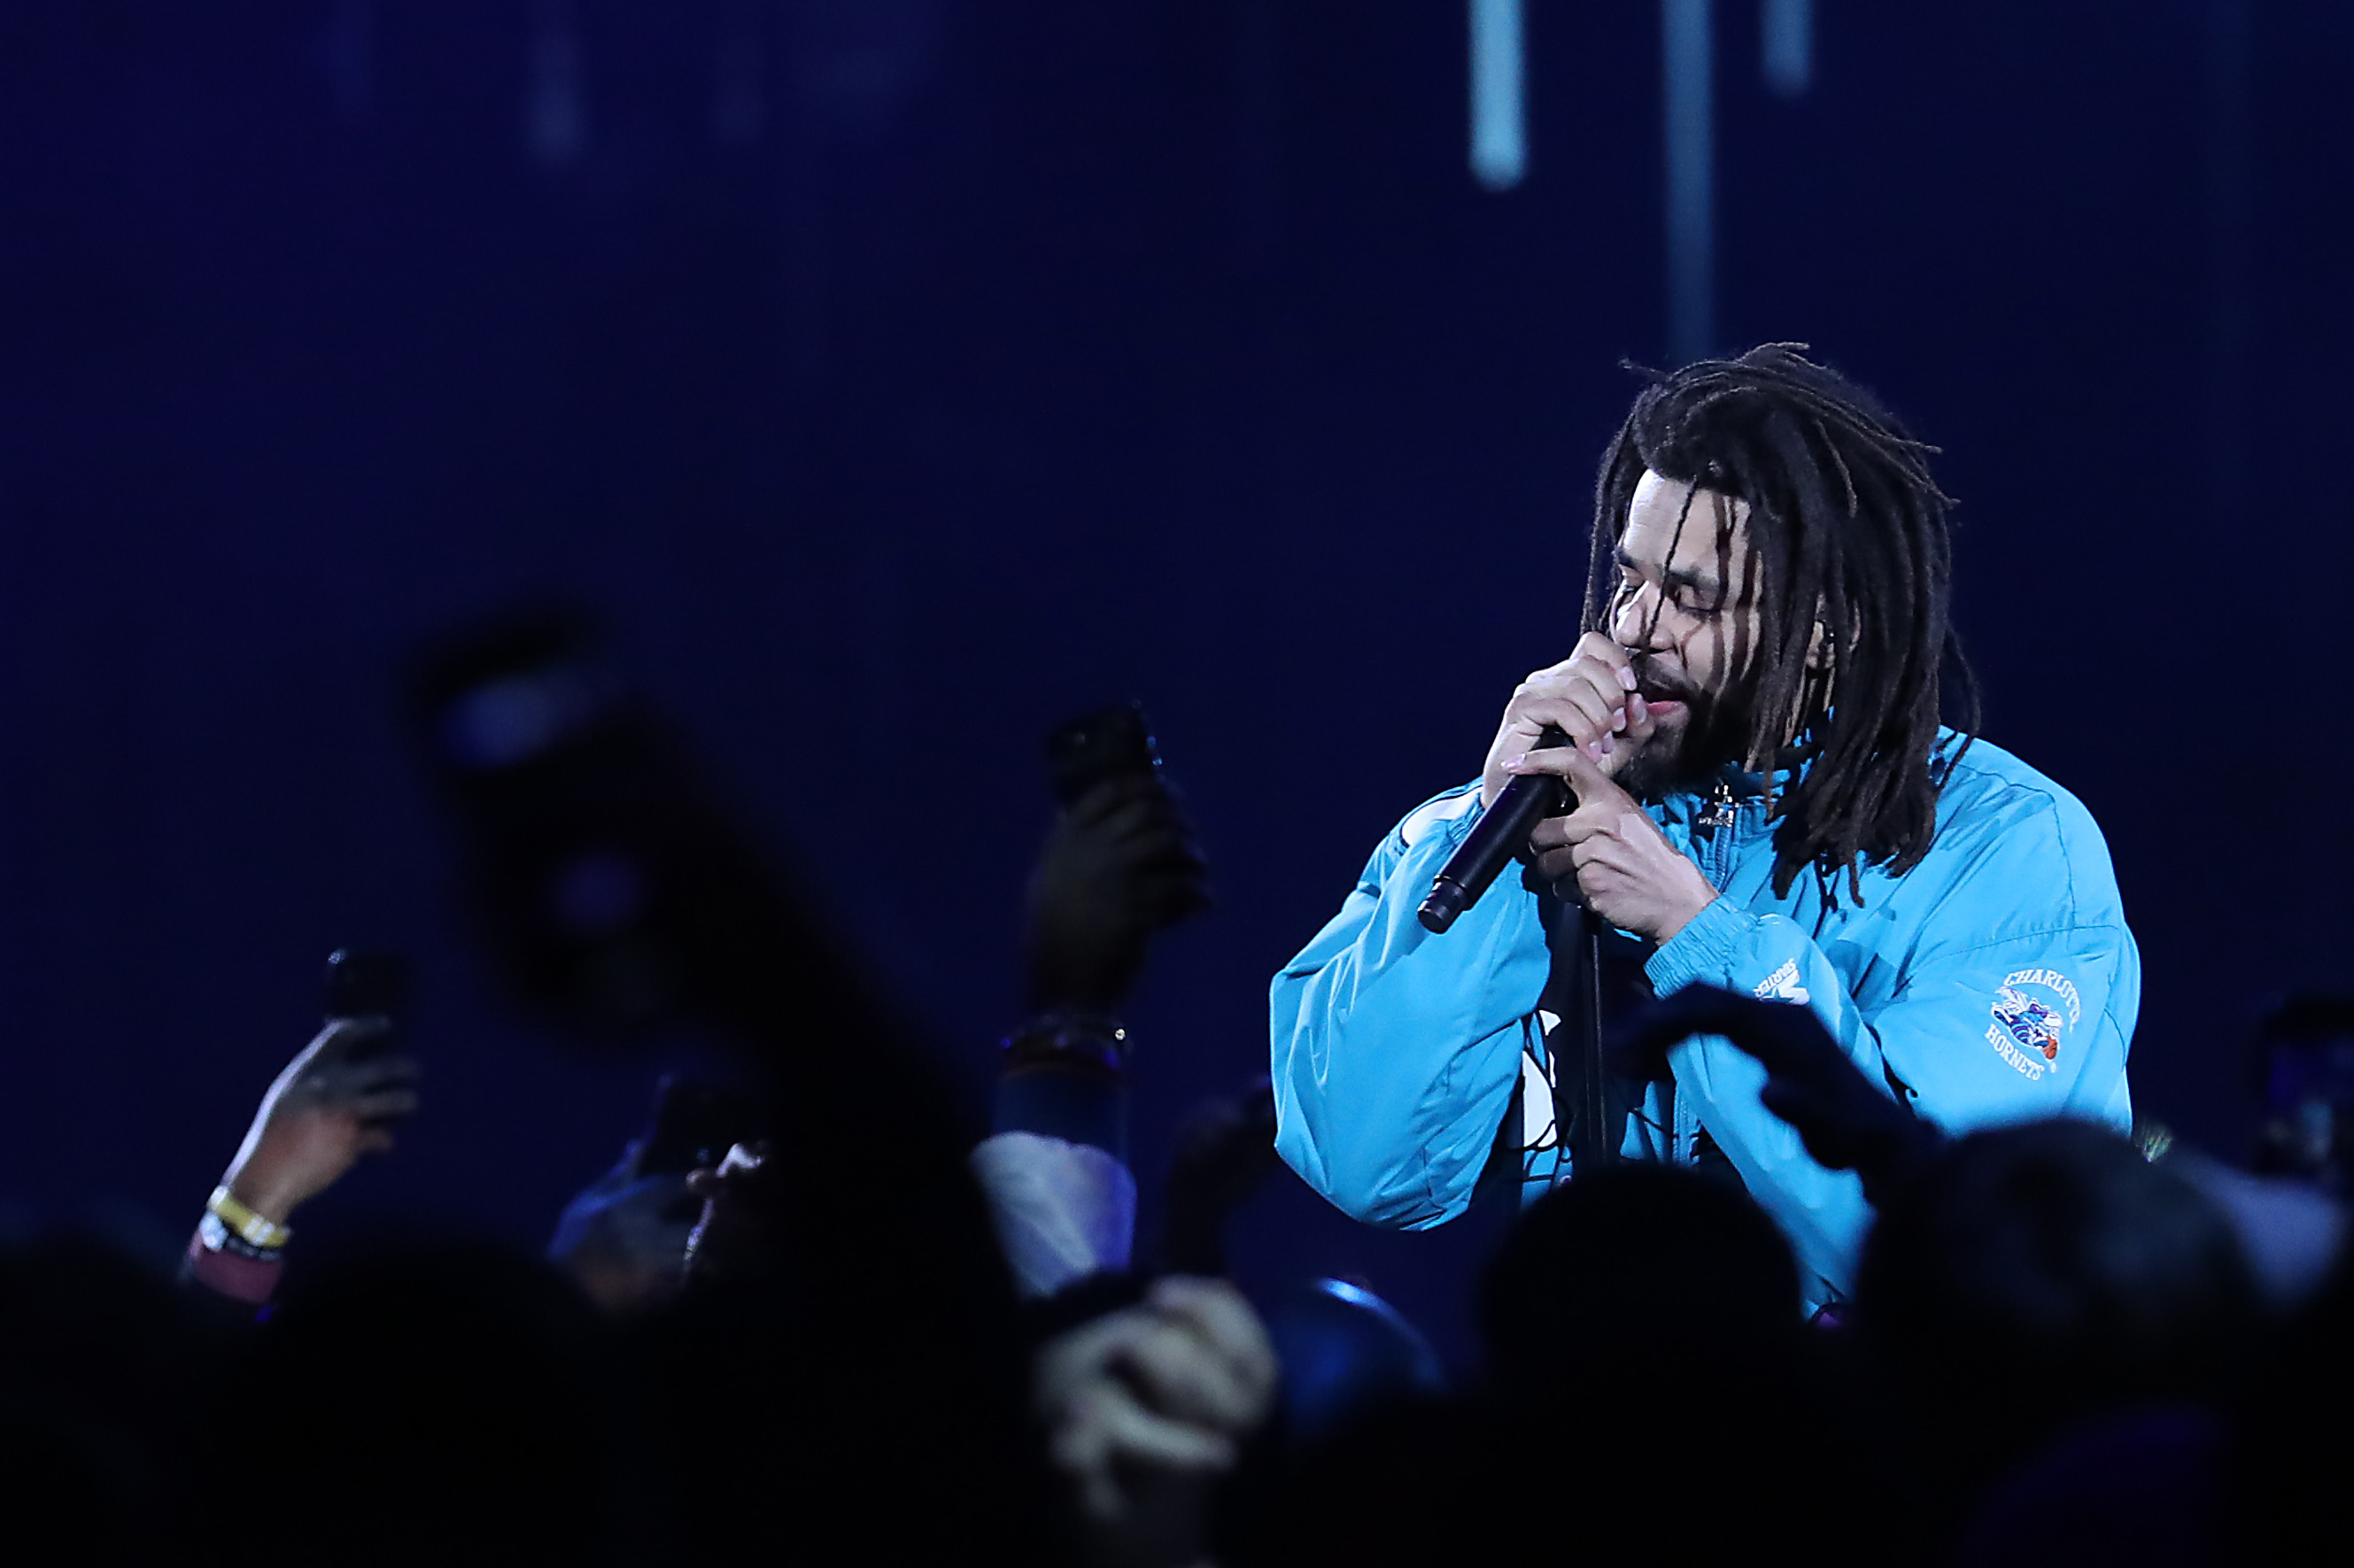 21 Savage Featuring J. Cole Wins Best Rap Song For A Lot, 2020 GRAMMYs